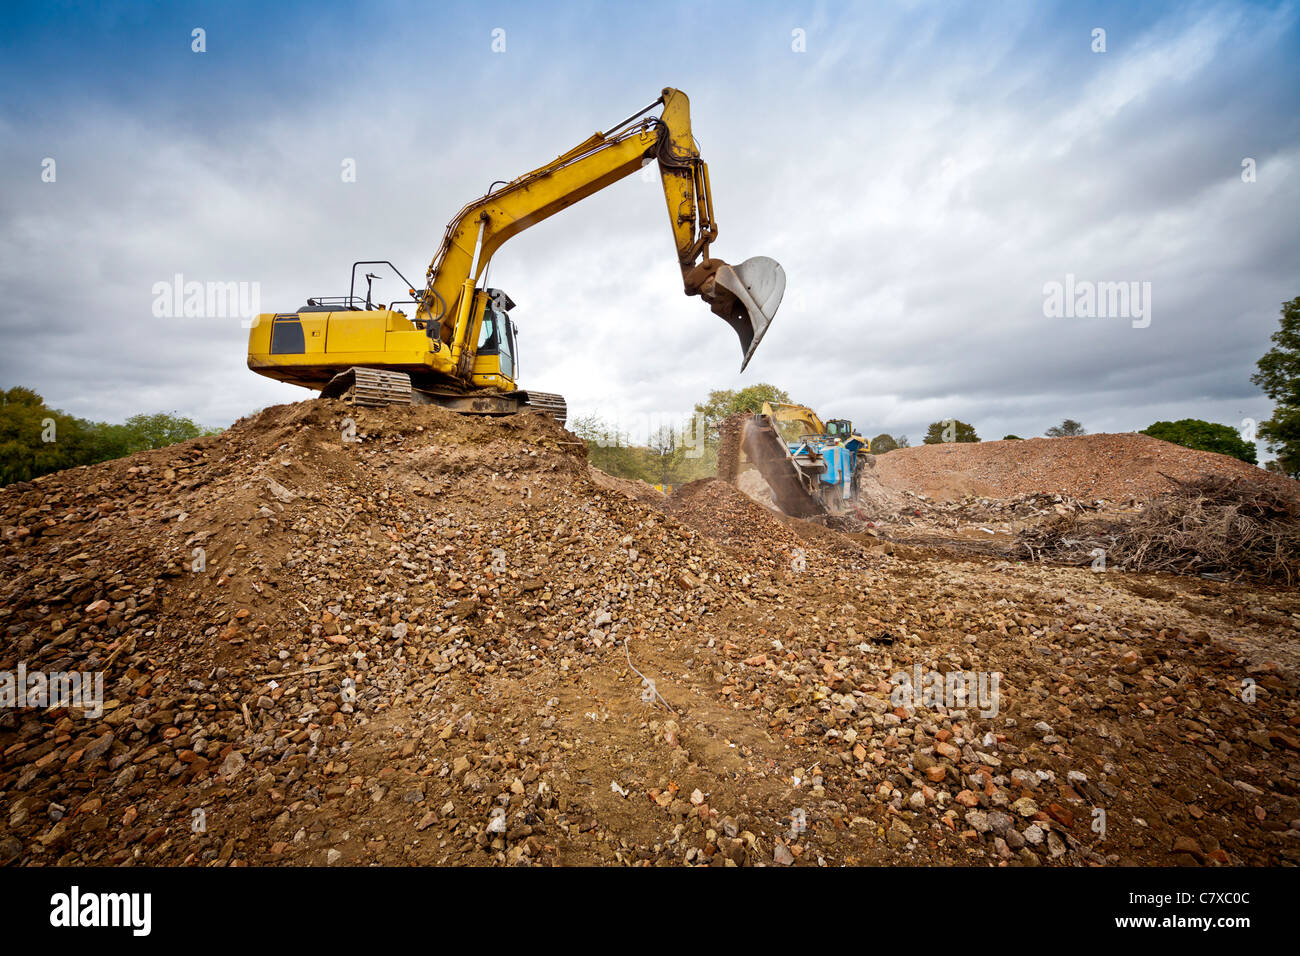 Demolition and ground works on construction site with construction vehicles in operation Stock Photo